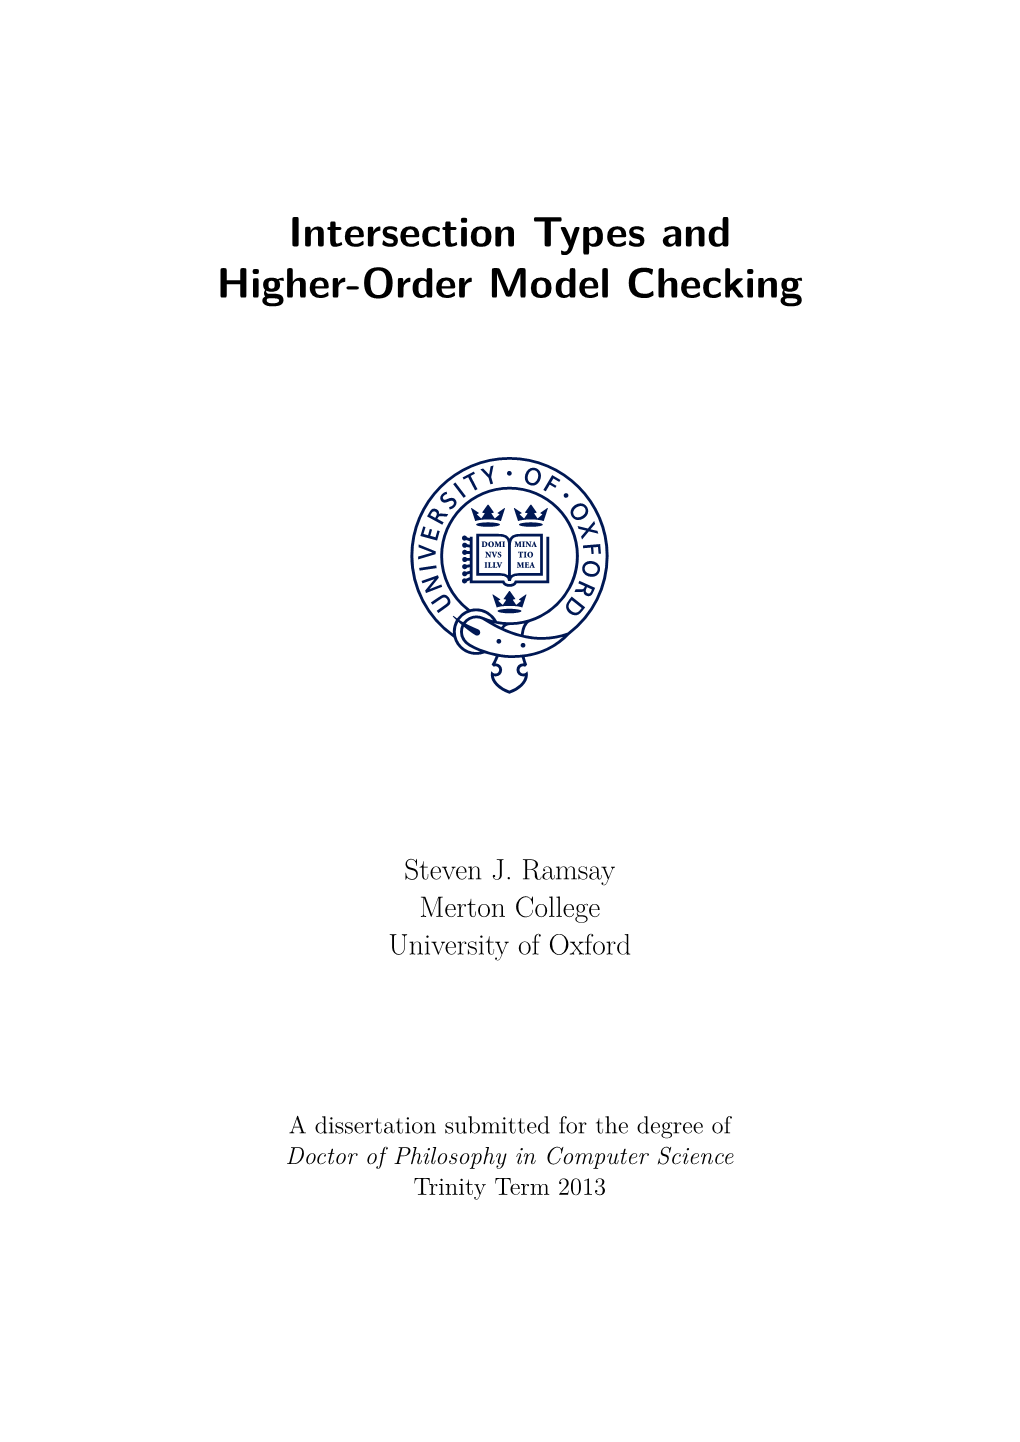 Intersection Types and Higher-Order Model Checking